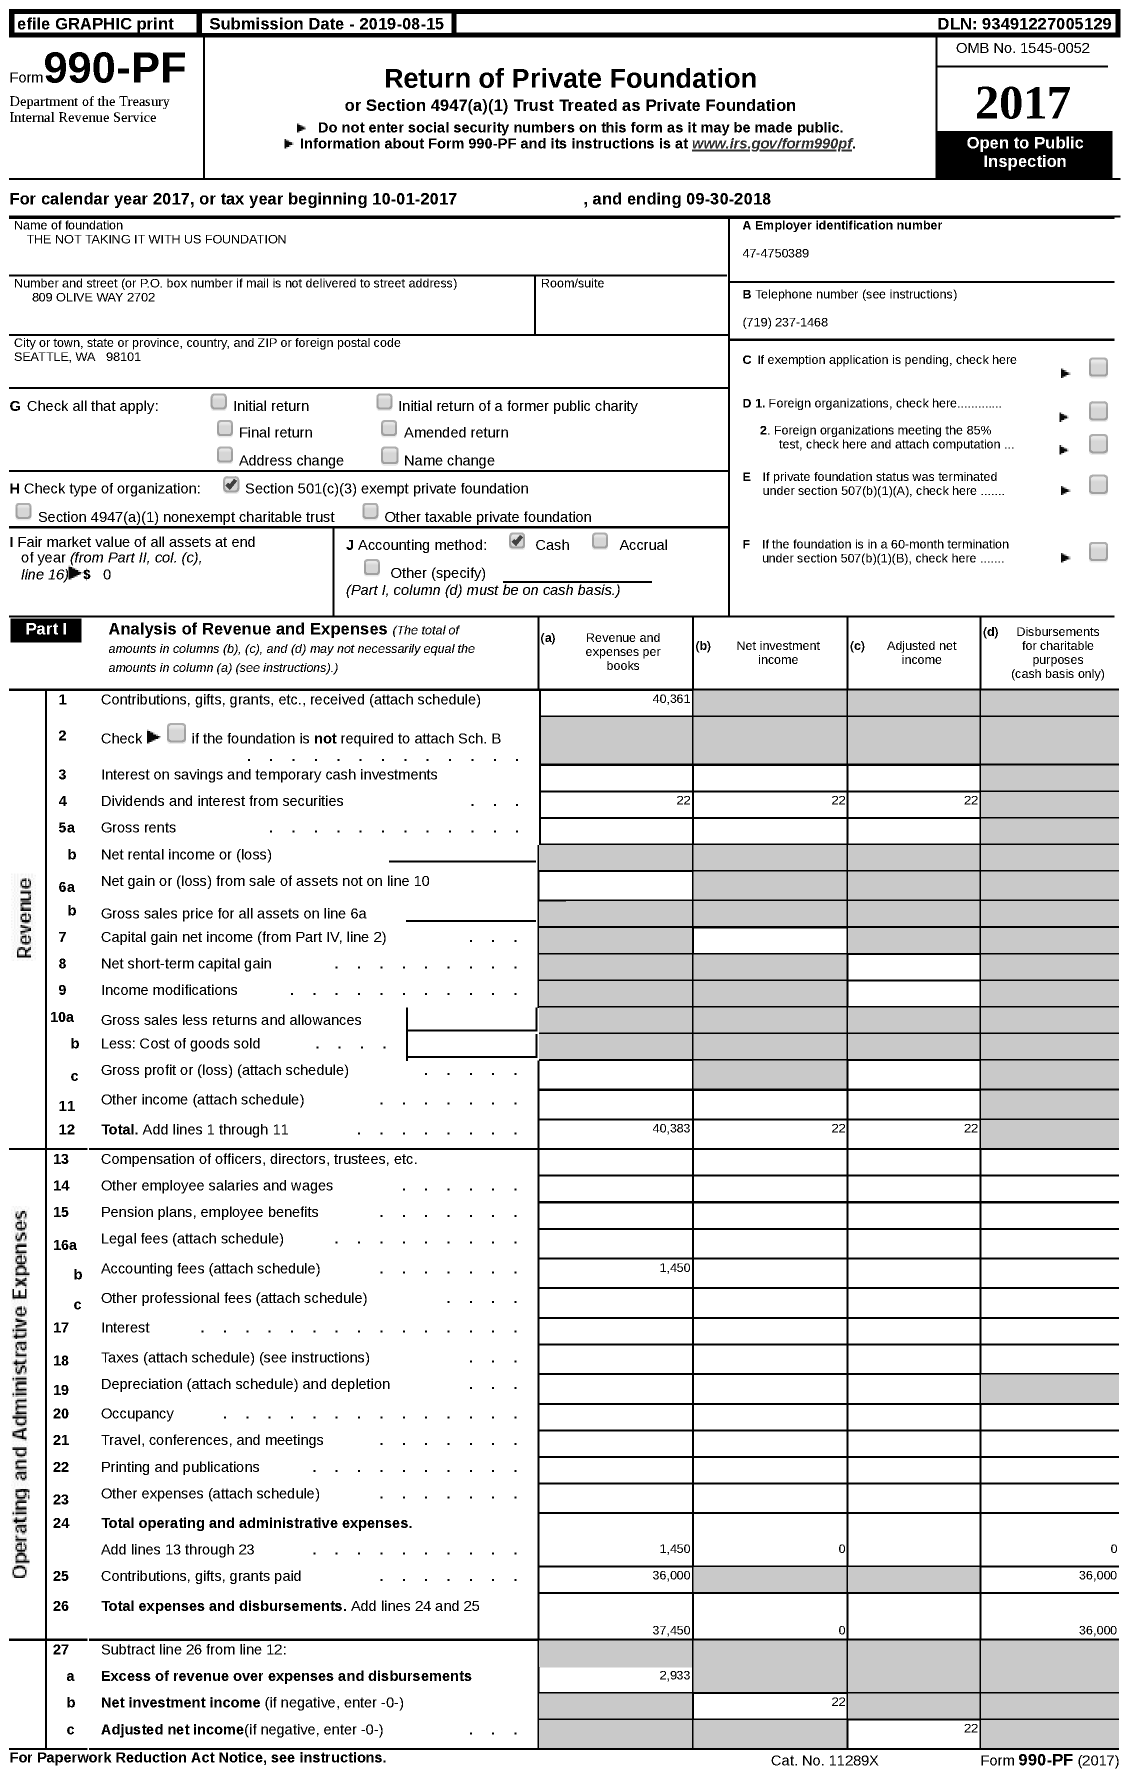 Image of first page of 2017 Form 990PF for The Not Taking It with Us Foundation